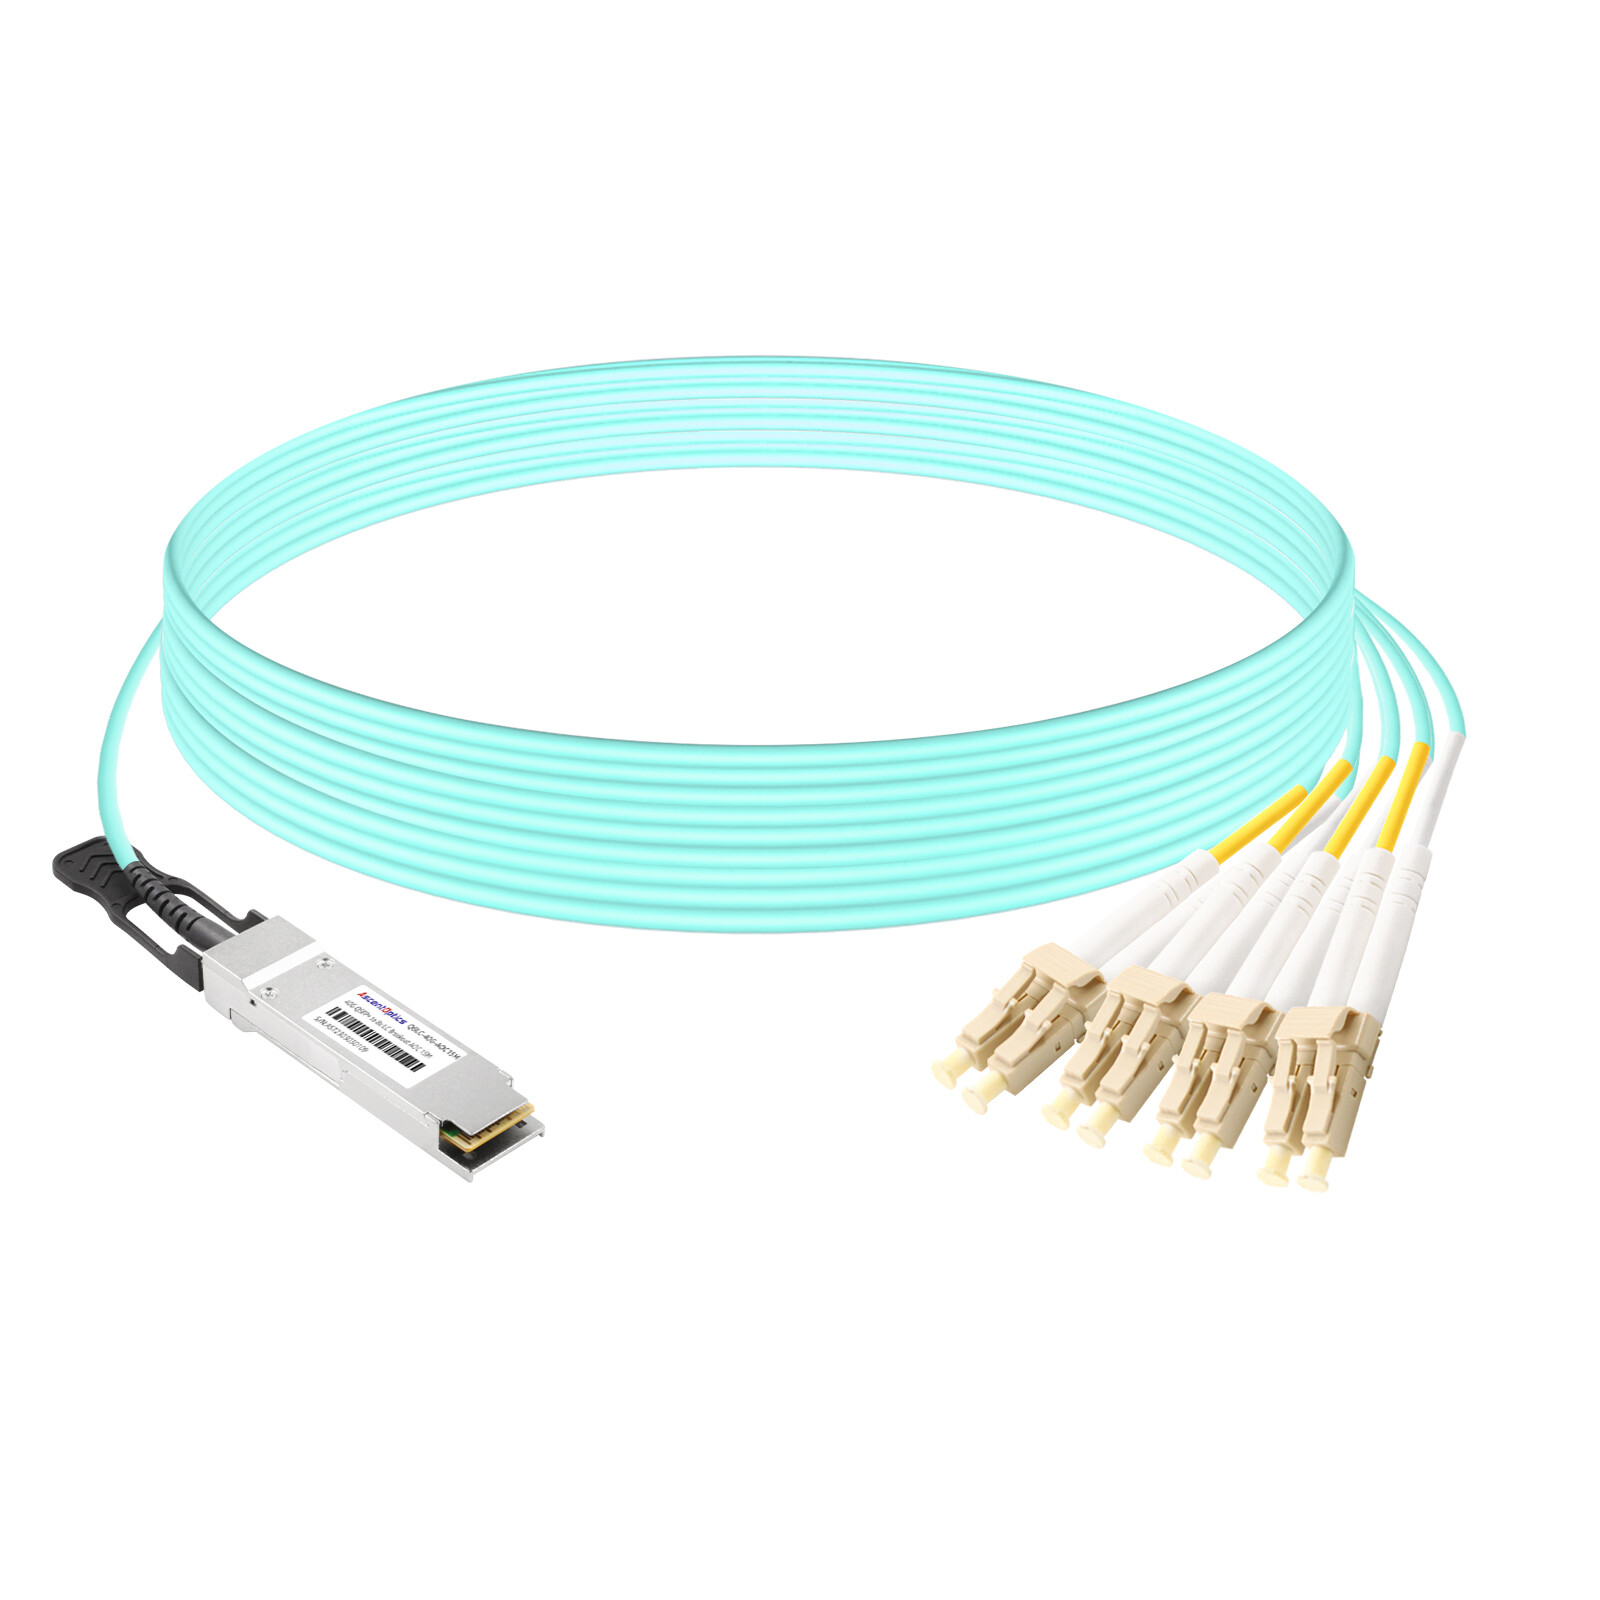 40G QSFP+ to 8x LC Breakout AOC Cable,15 Meters